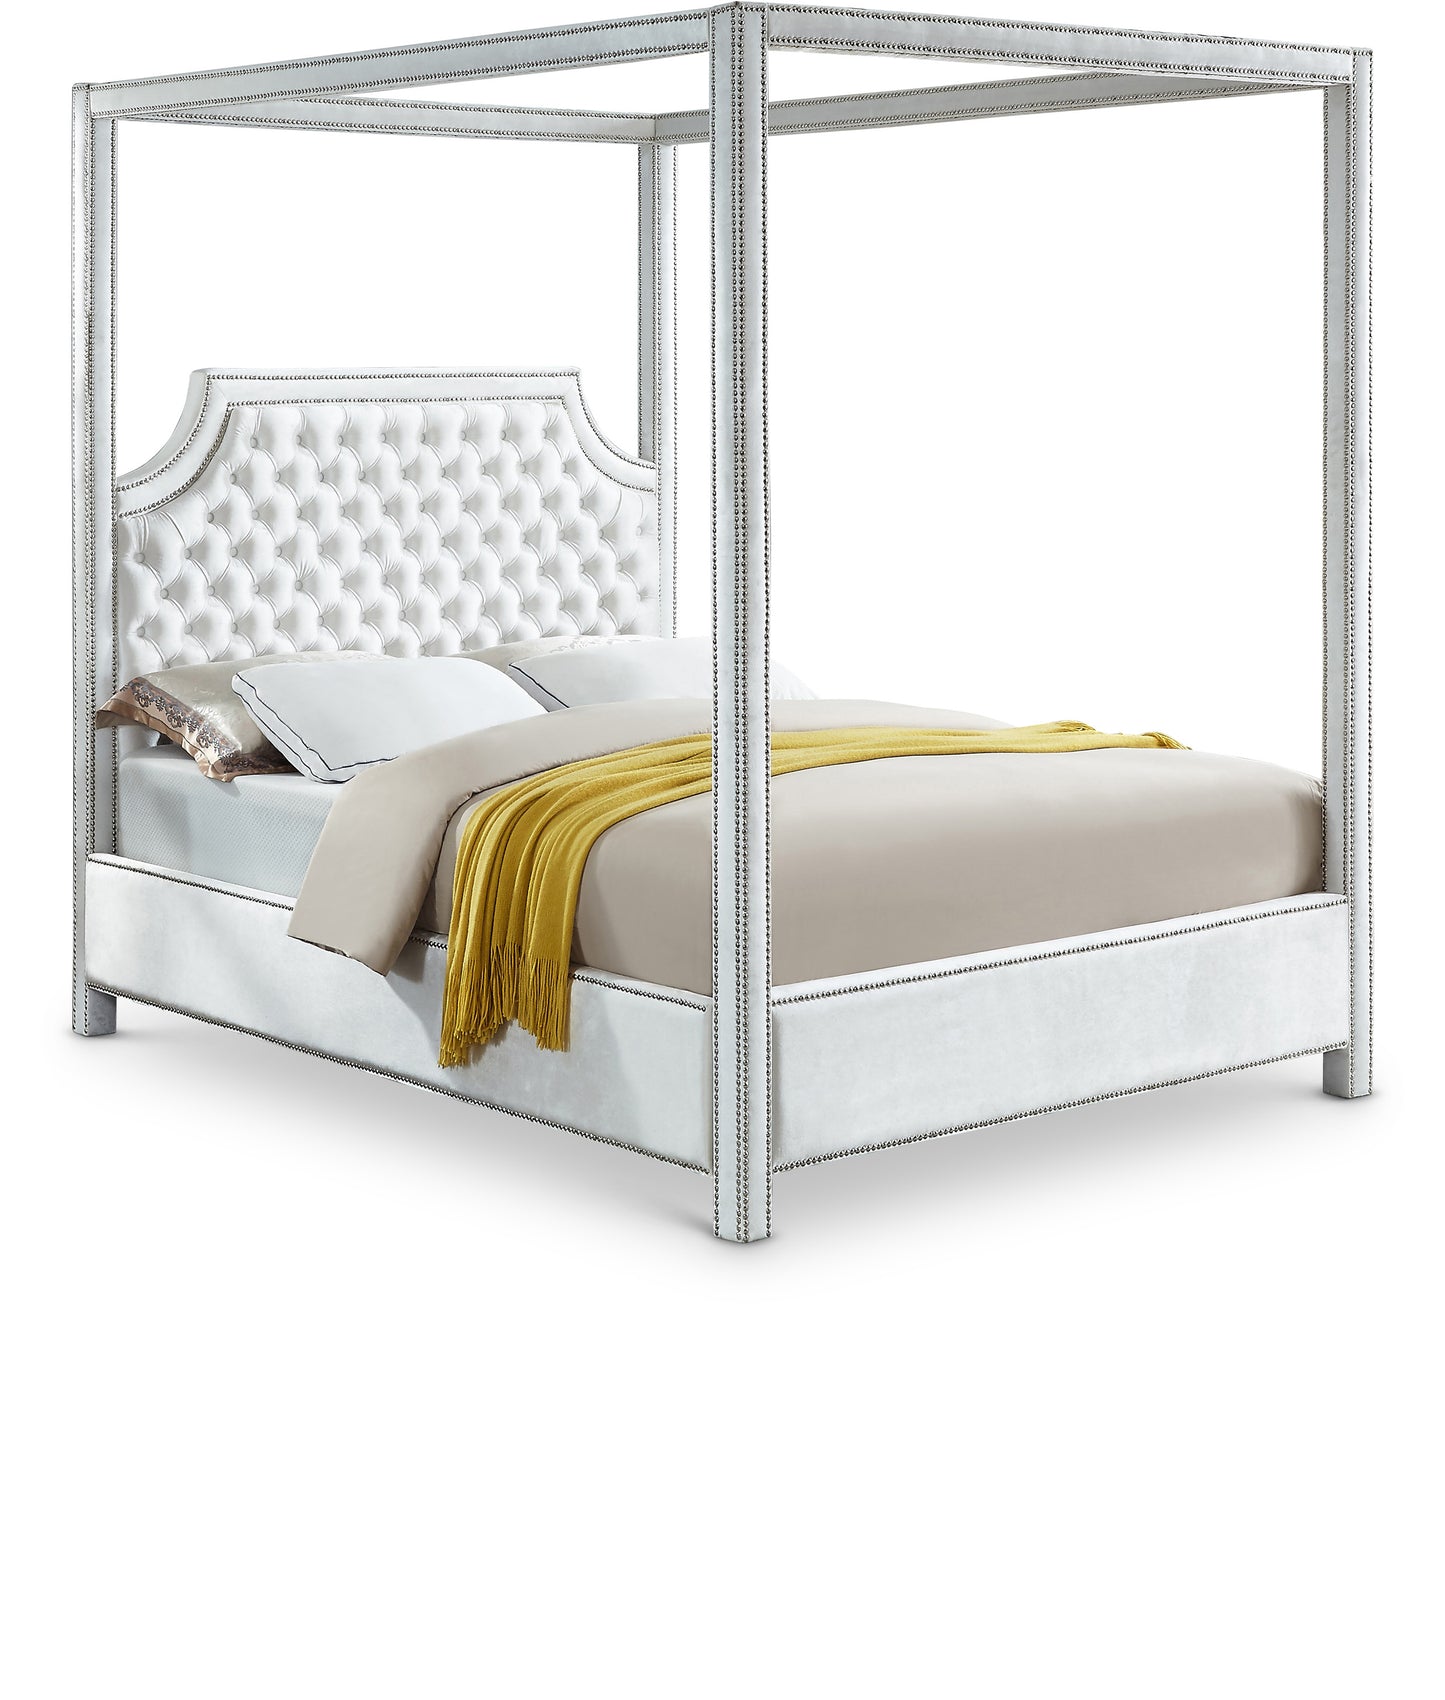 queen bed (3 boxes)